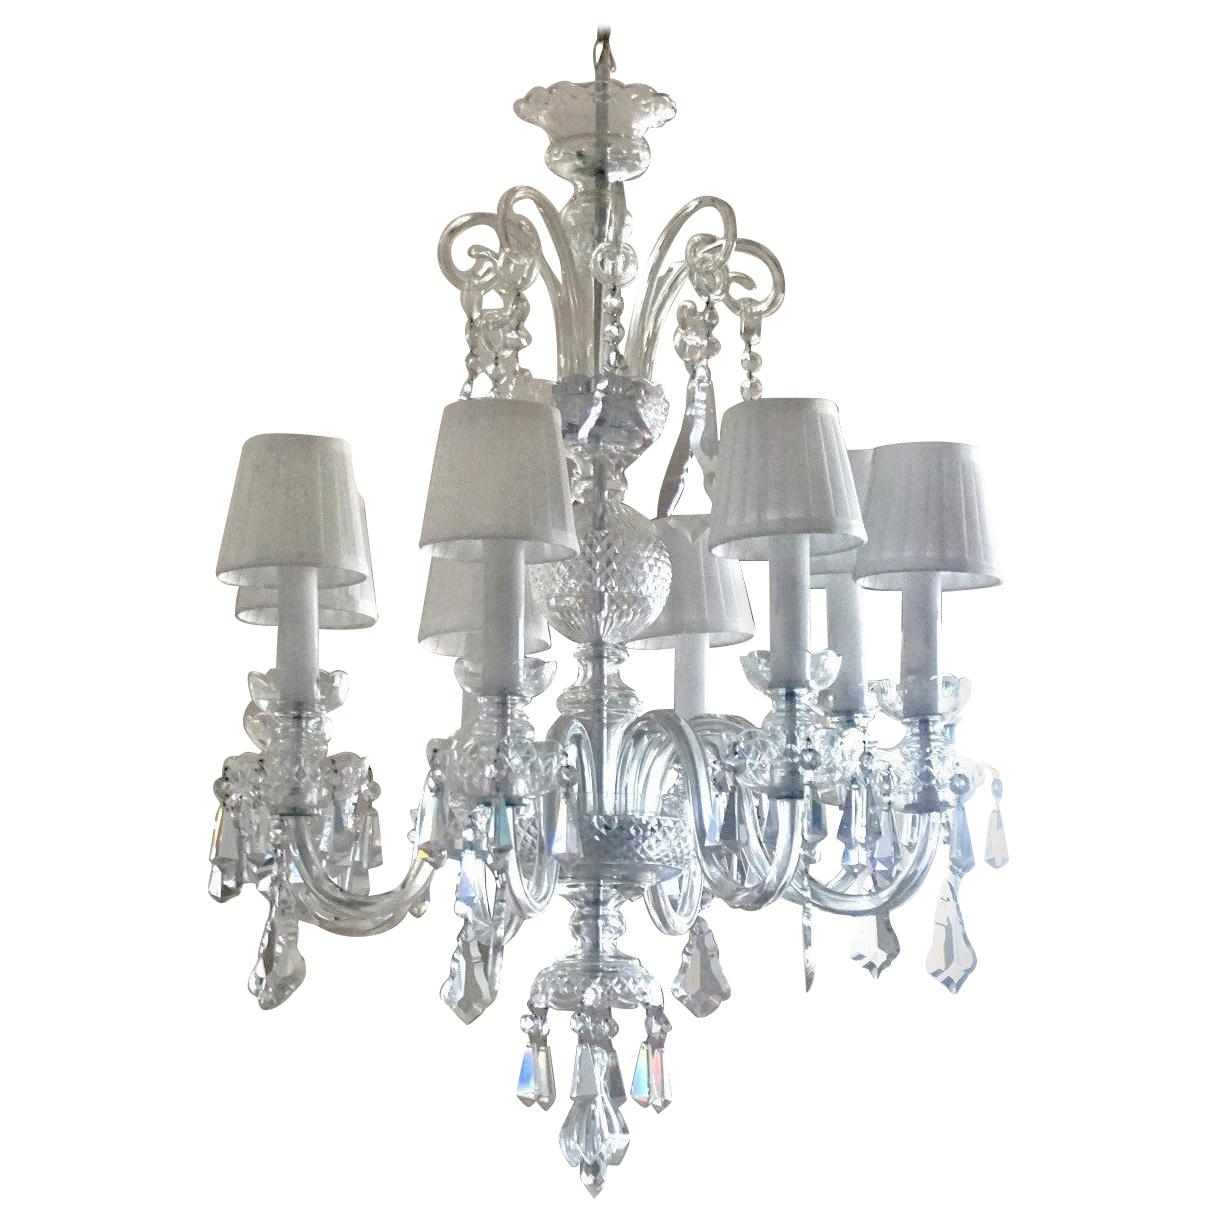 A rare original Venetian handcrafted crystal eight-light chandelier, Italy, 1910-1920. Eight hand blown Murano scroll lamp arms with candelabra light sockets surrounded by glass candle covers. This very elegant chandelier is decorated with eight